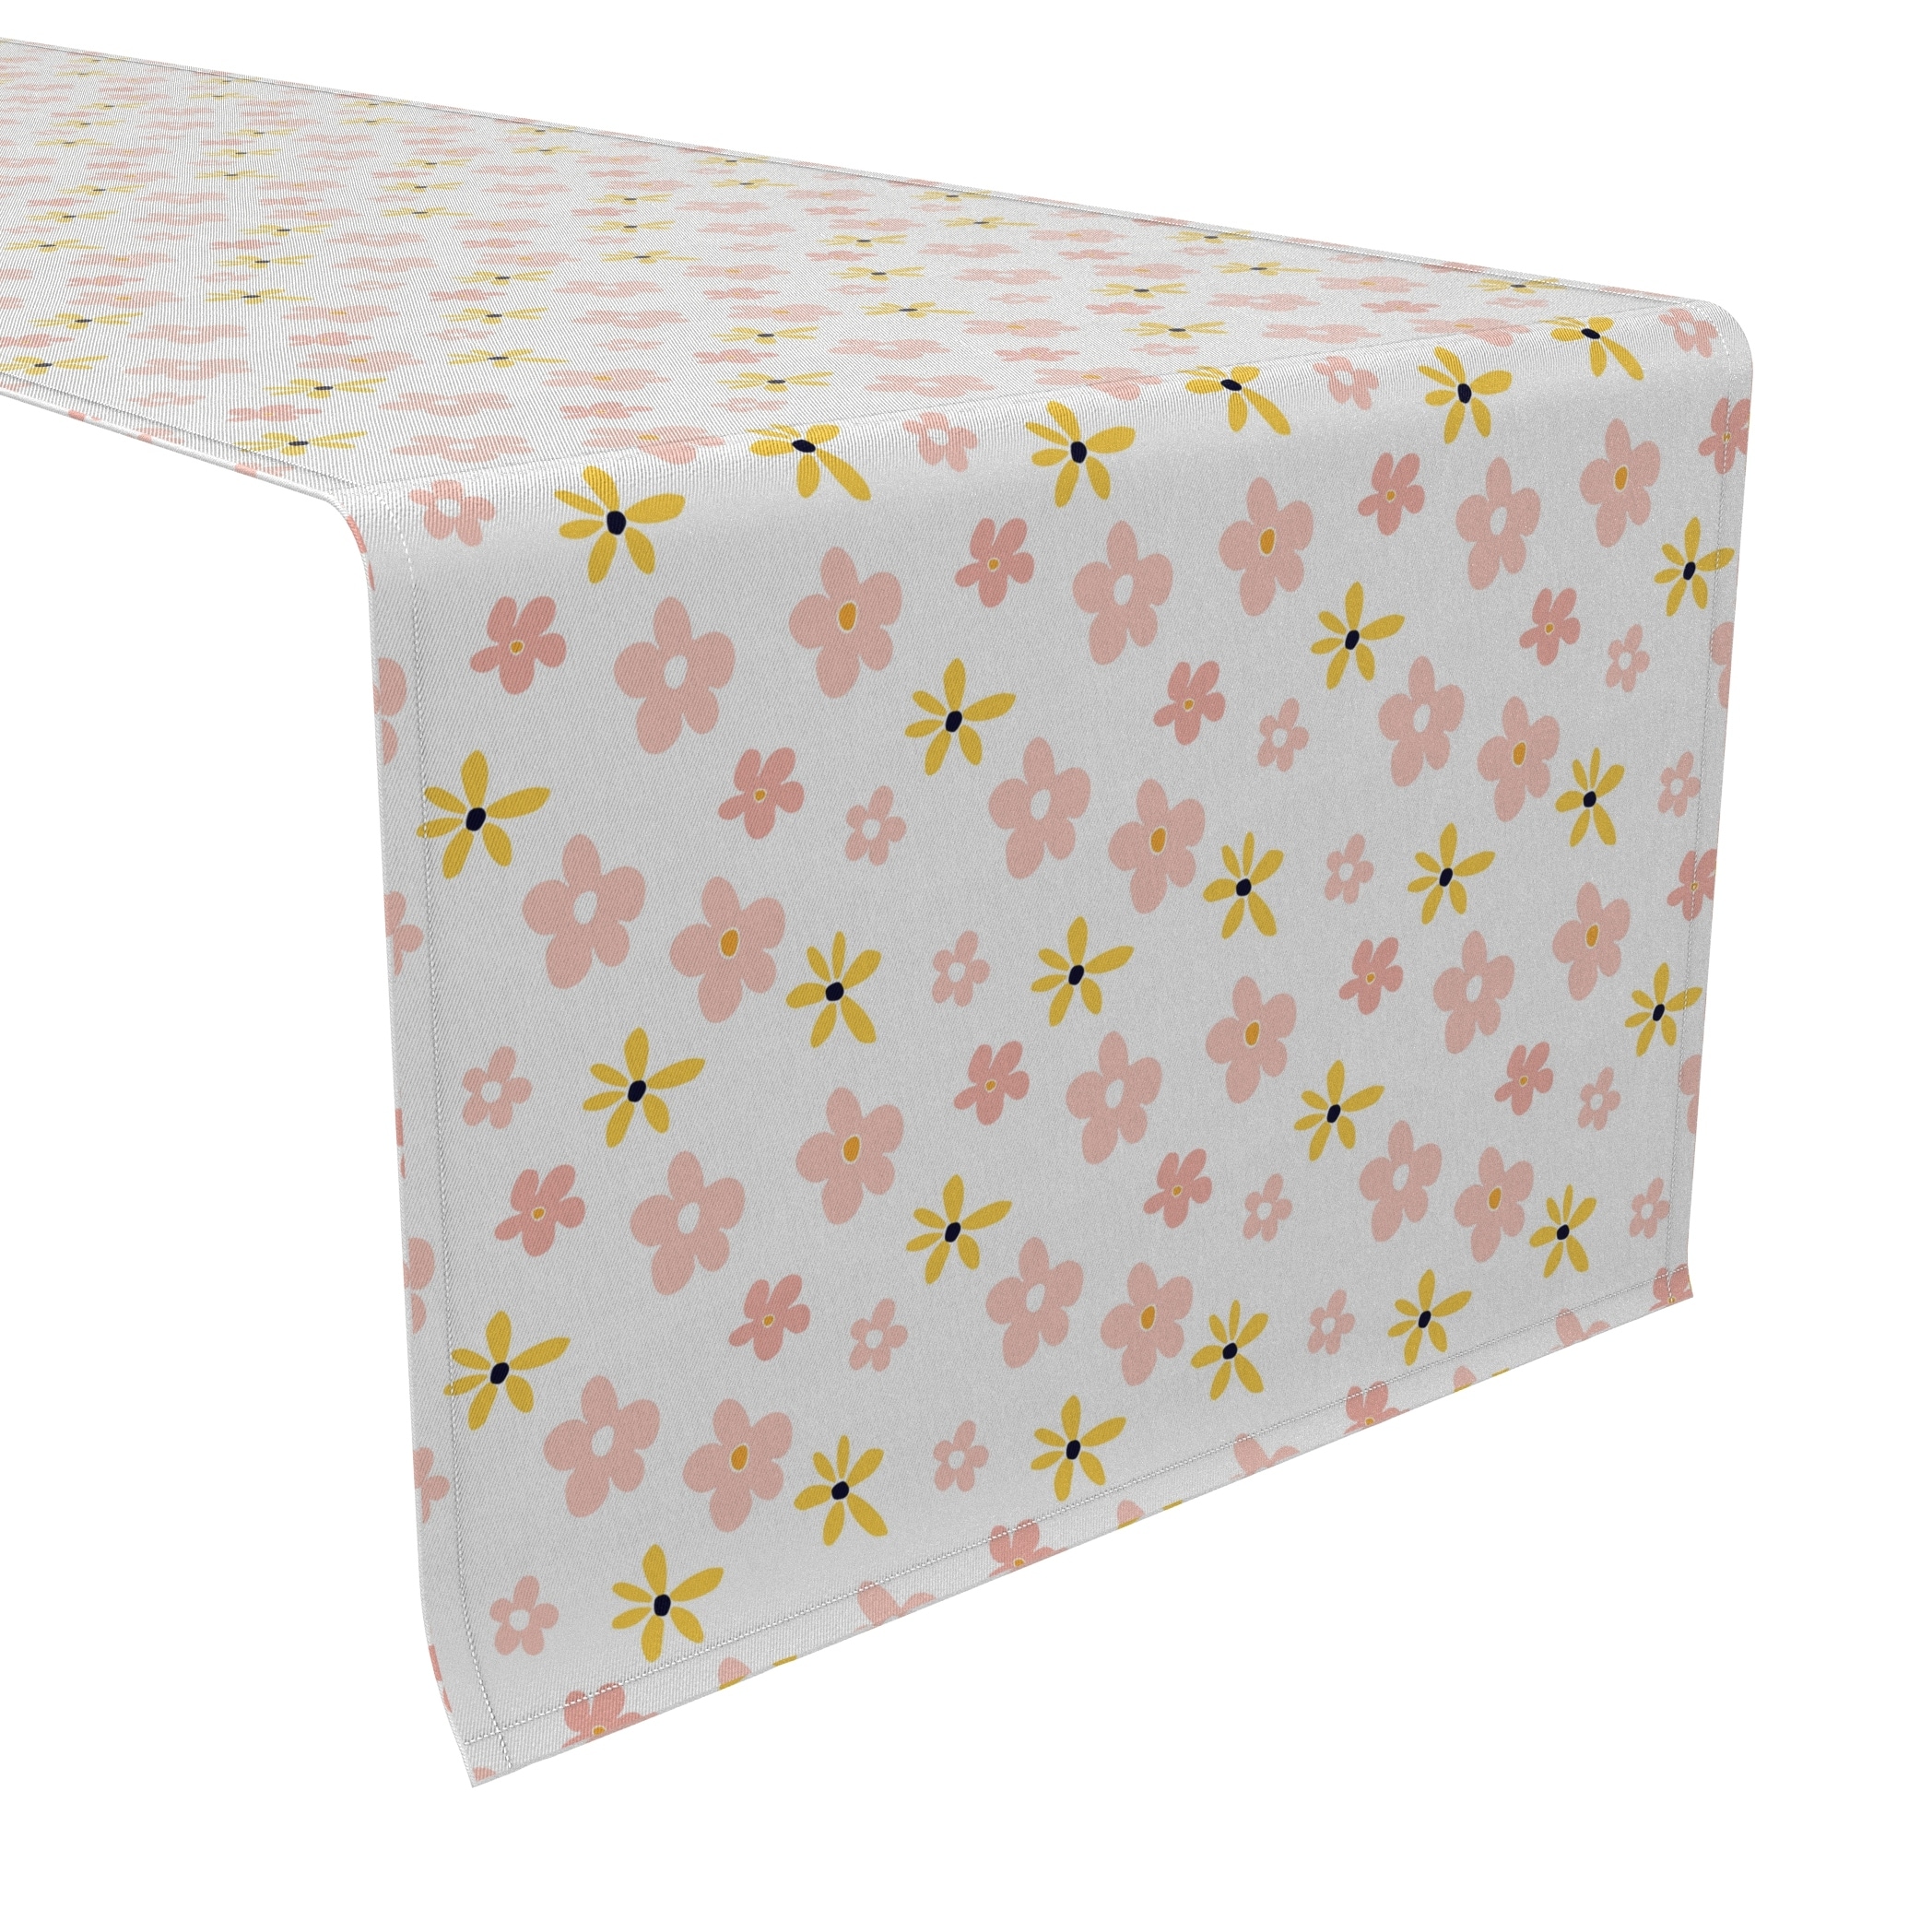 Fabric Textile Products, Inc. Table Runner, 100% Cotton, 16x108", Cartoon Graphic Flowers